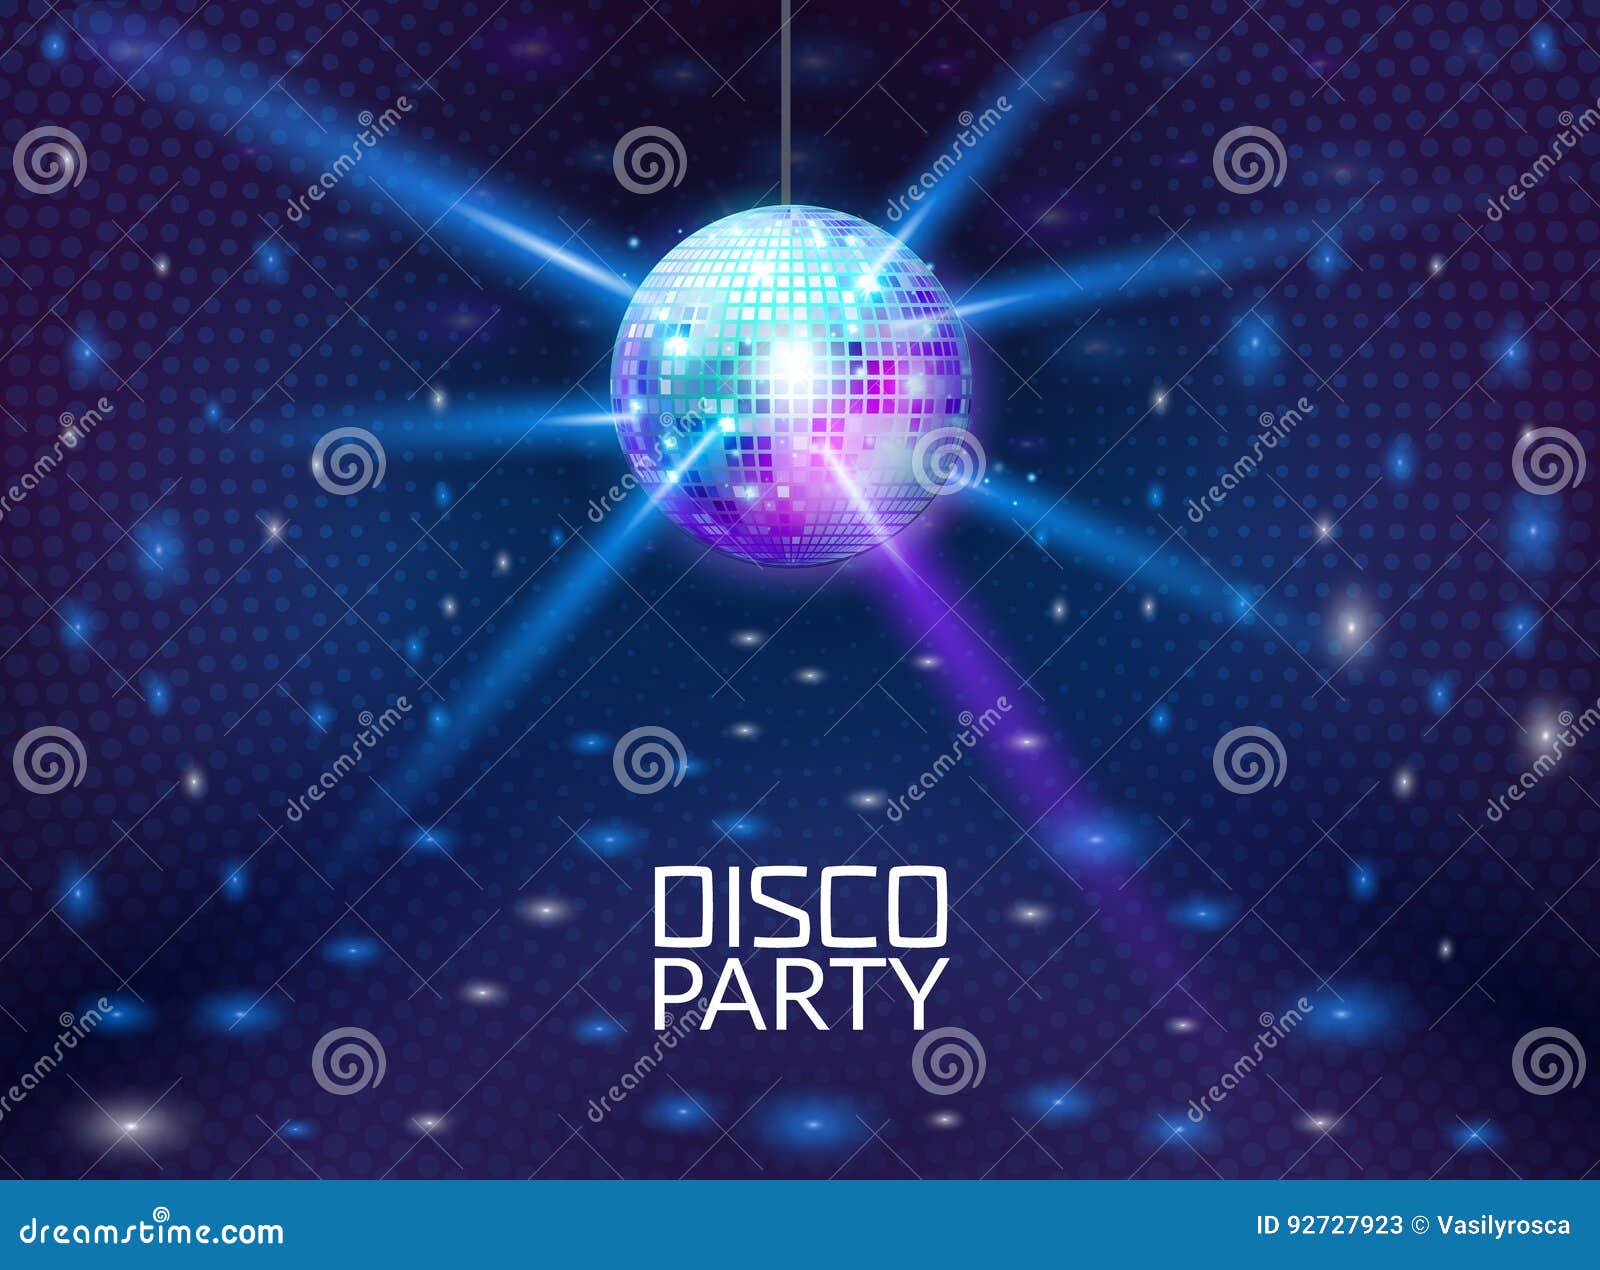 disco party background. music dance   for advertise. disco ball flyer or poster  promo